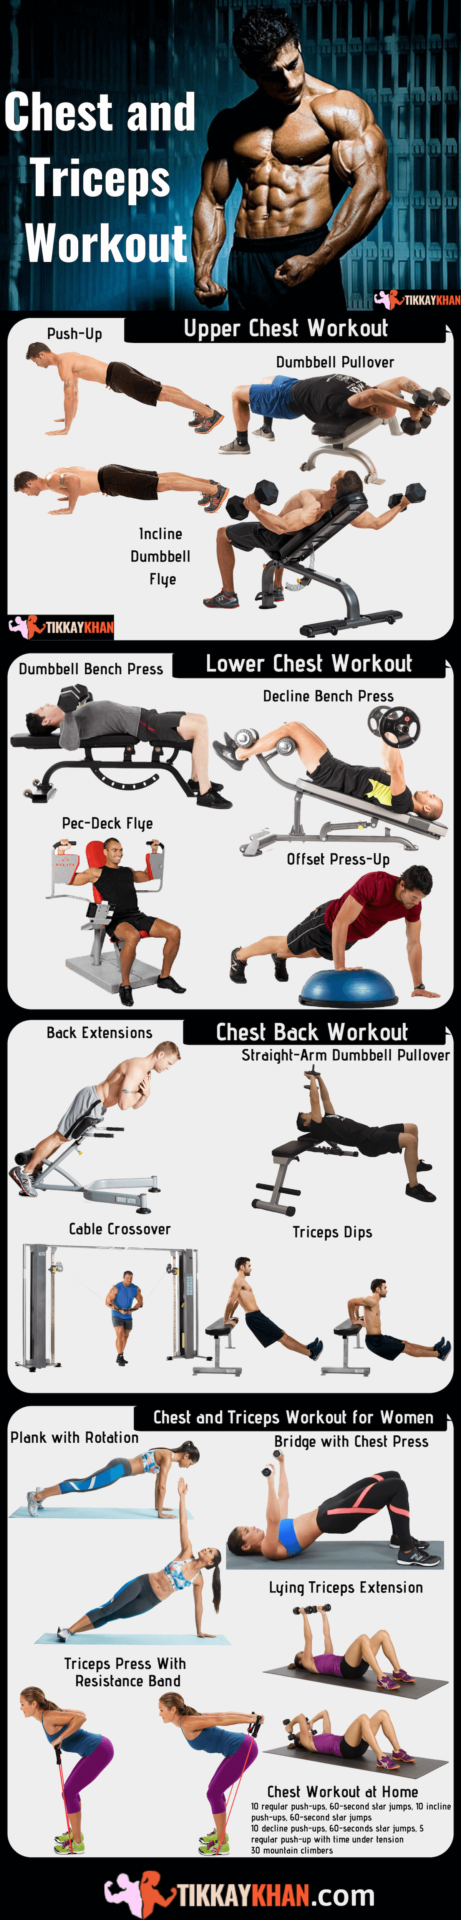 Chest and Triceps Workout Infographic